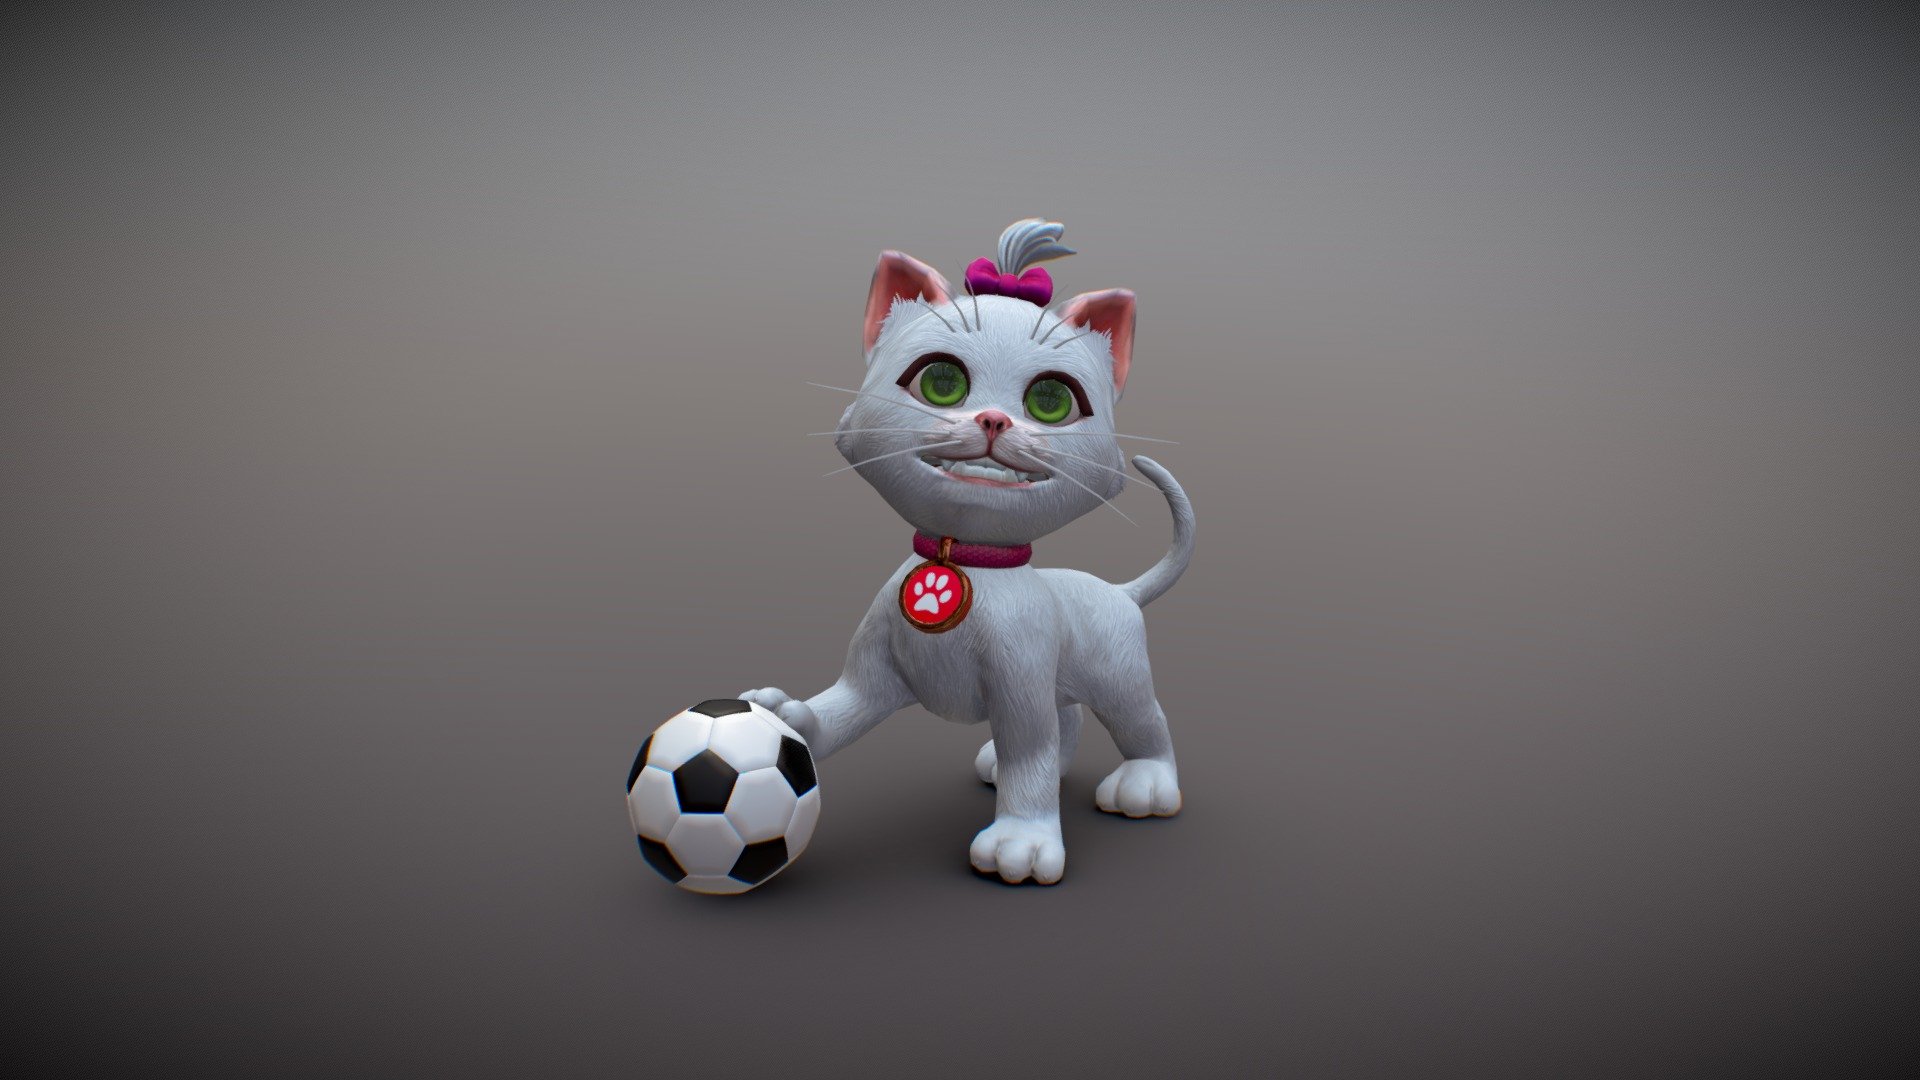 Cute kitty cat smiling, 
Sculpted in Zbrush, retoped in Maya, textured in Substance - Kitty - 3D model by Vitalii Yevsovych (@Onnix) 3d model